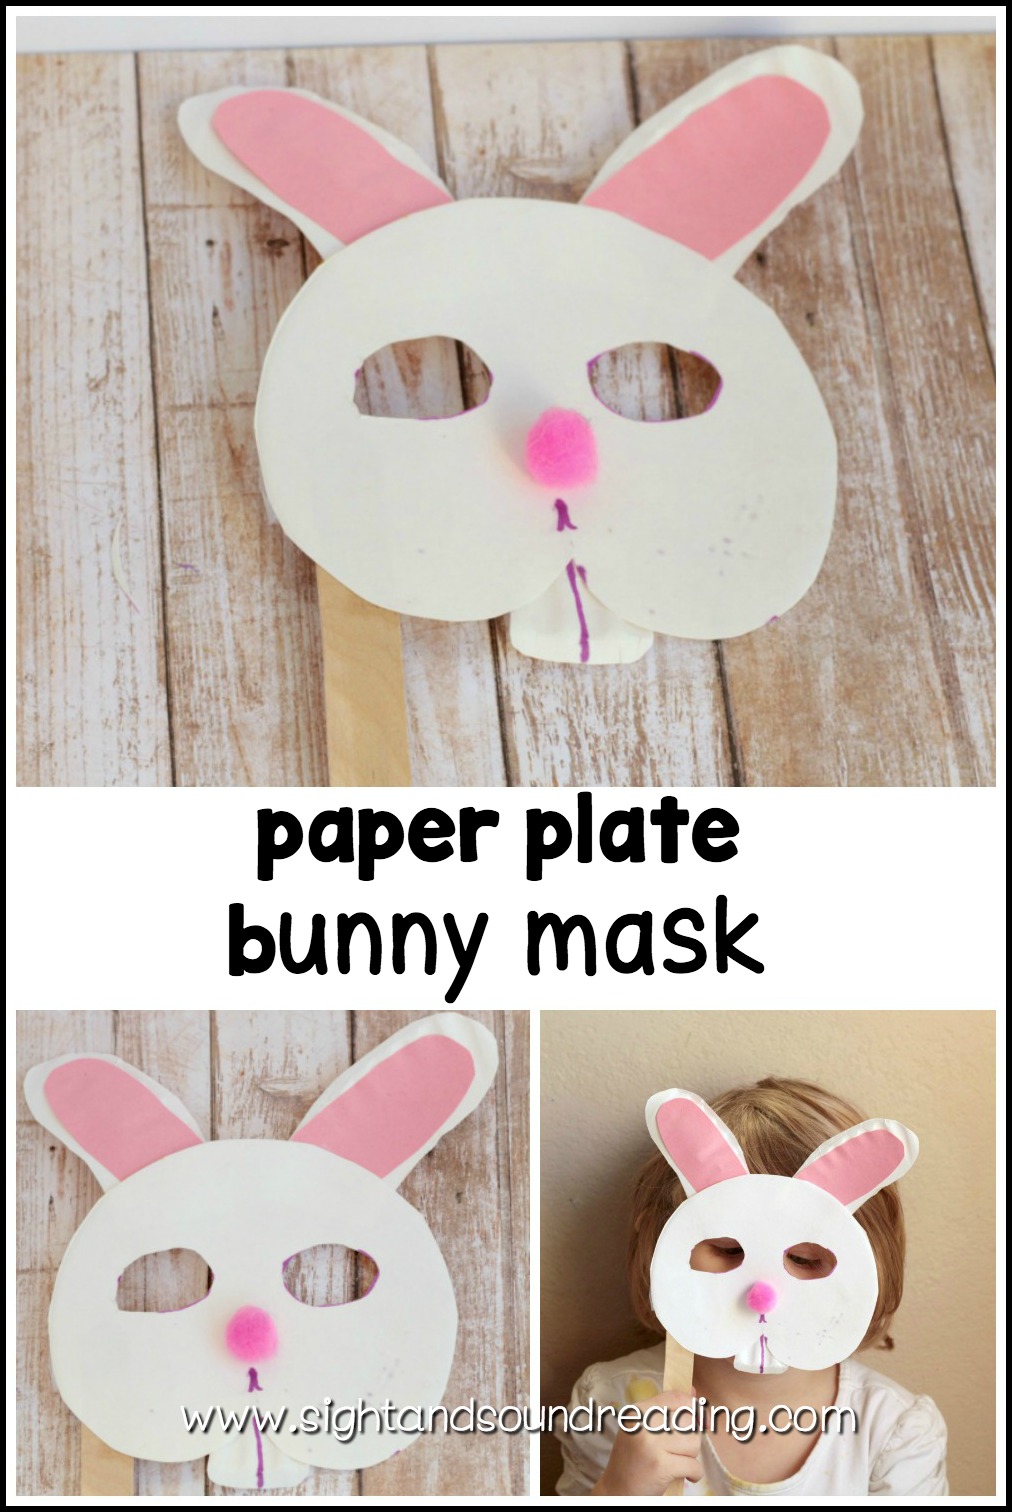 Spring is around the corner, celebrate it by making paper plate bunny mask! This mask needs a craft, a stick, a paper plate, and construction paper.